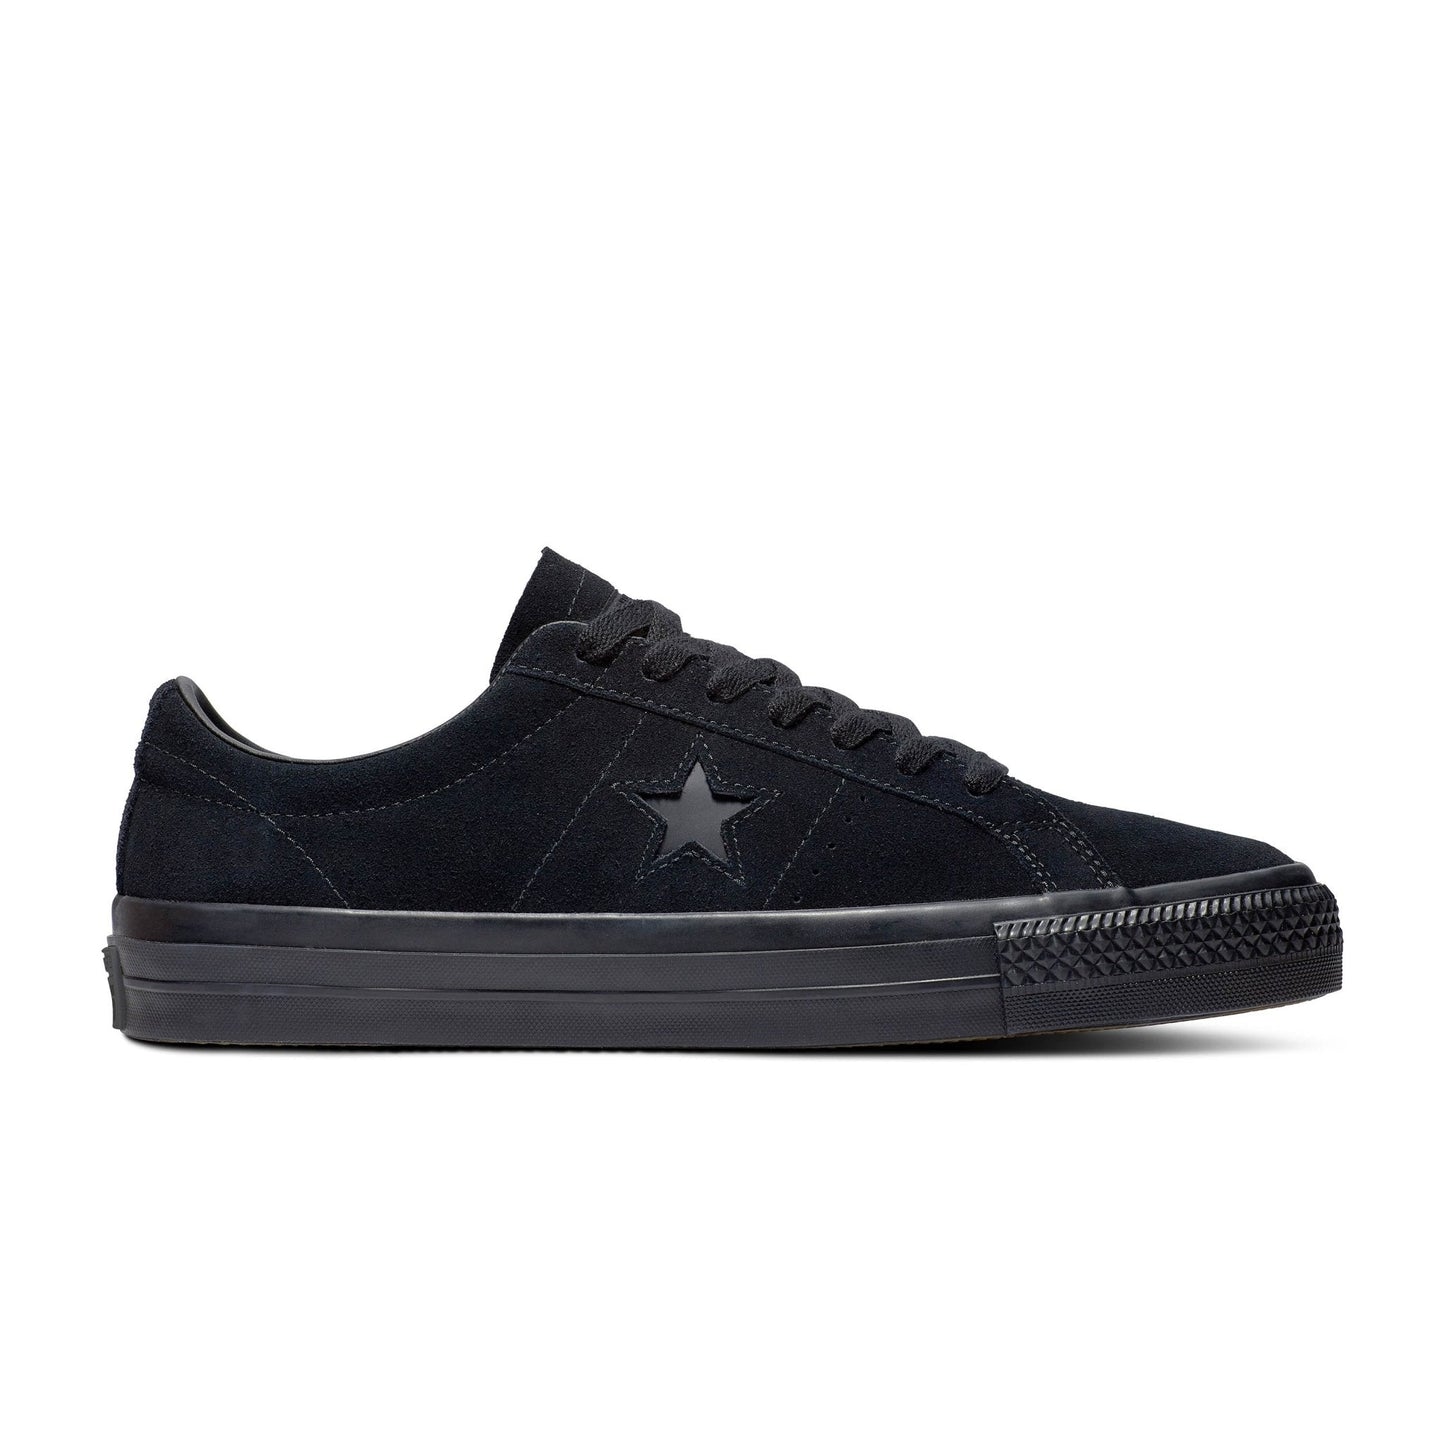 CONS One Star Pro Suede OX - Black / Black / Black